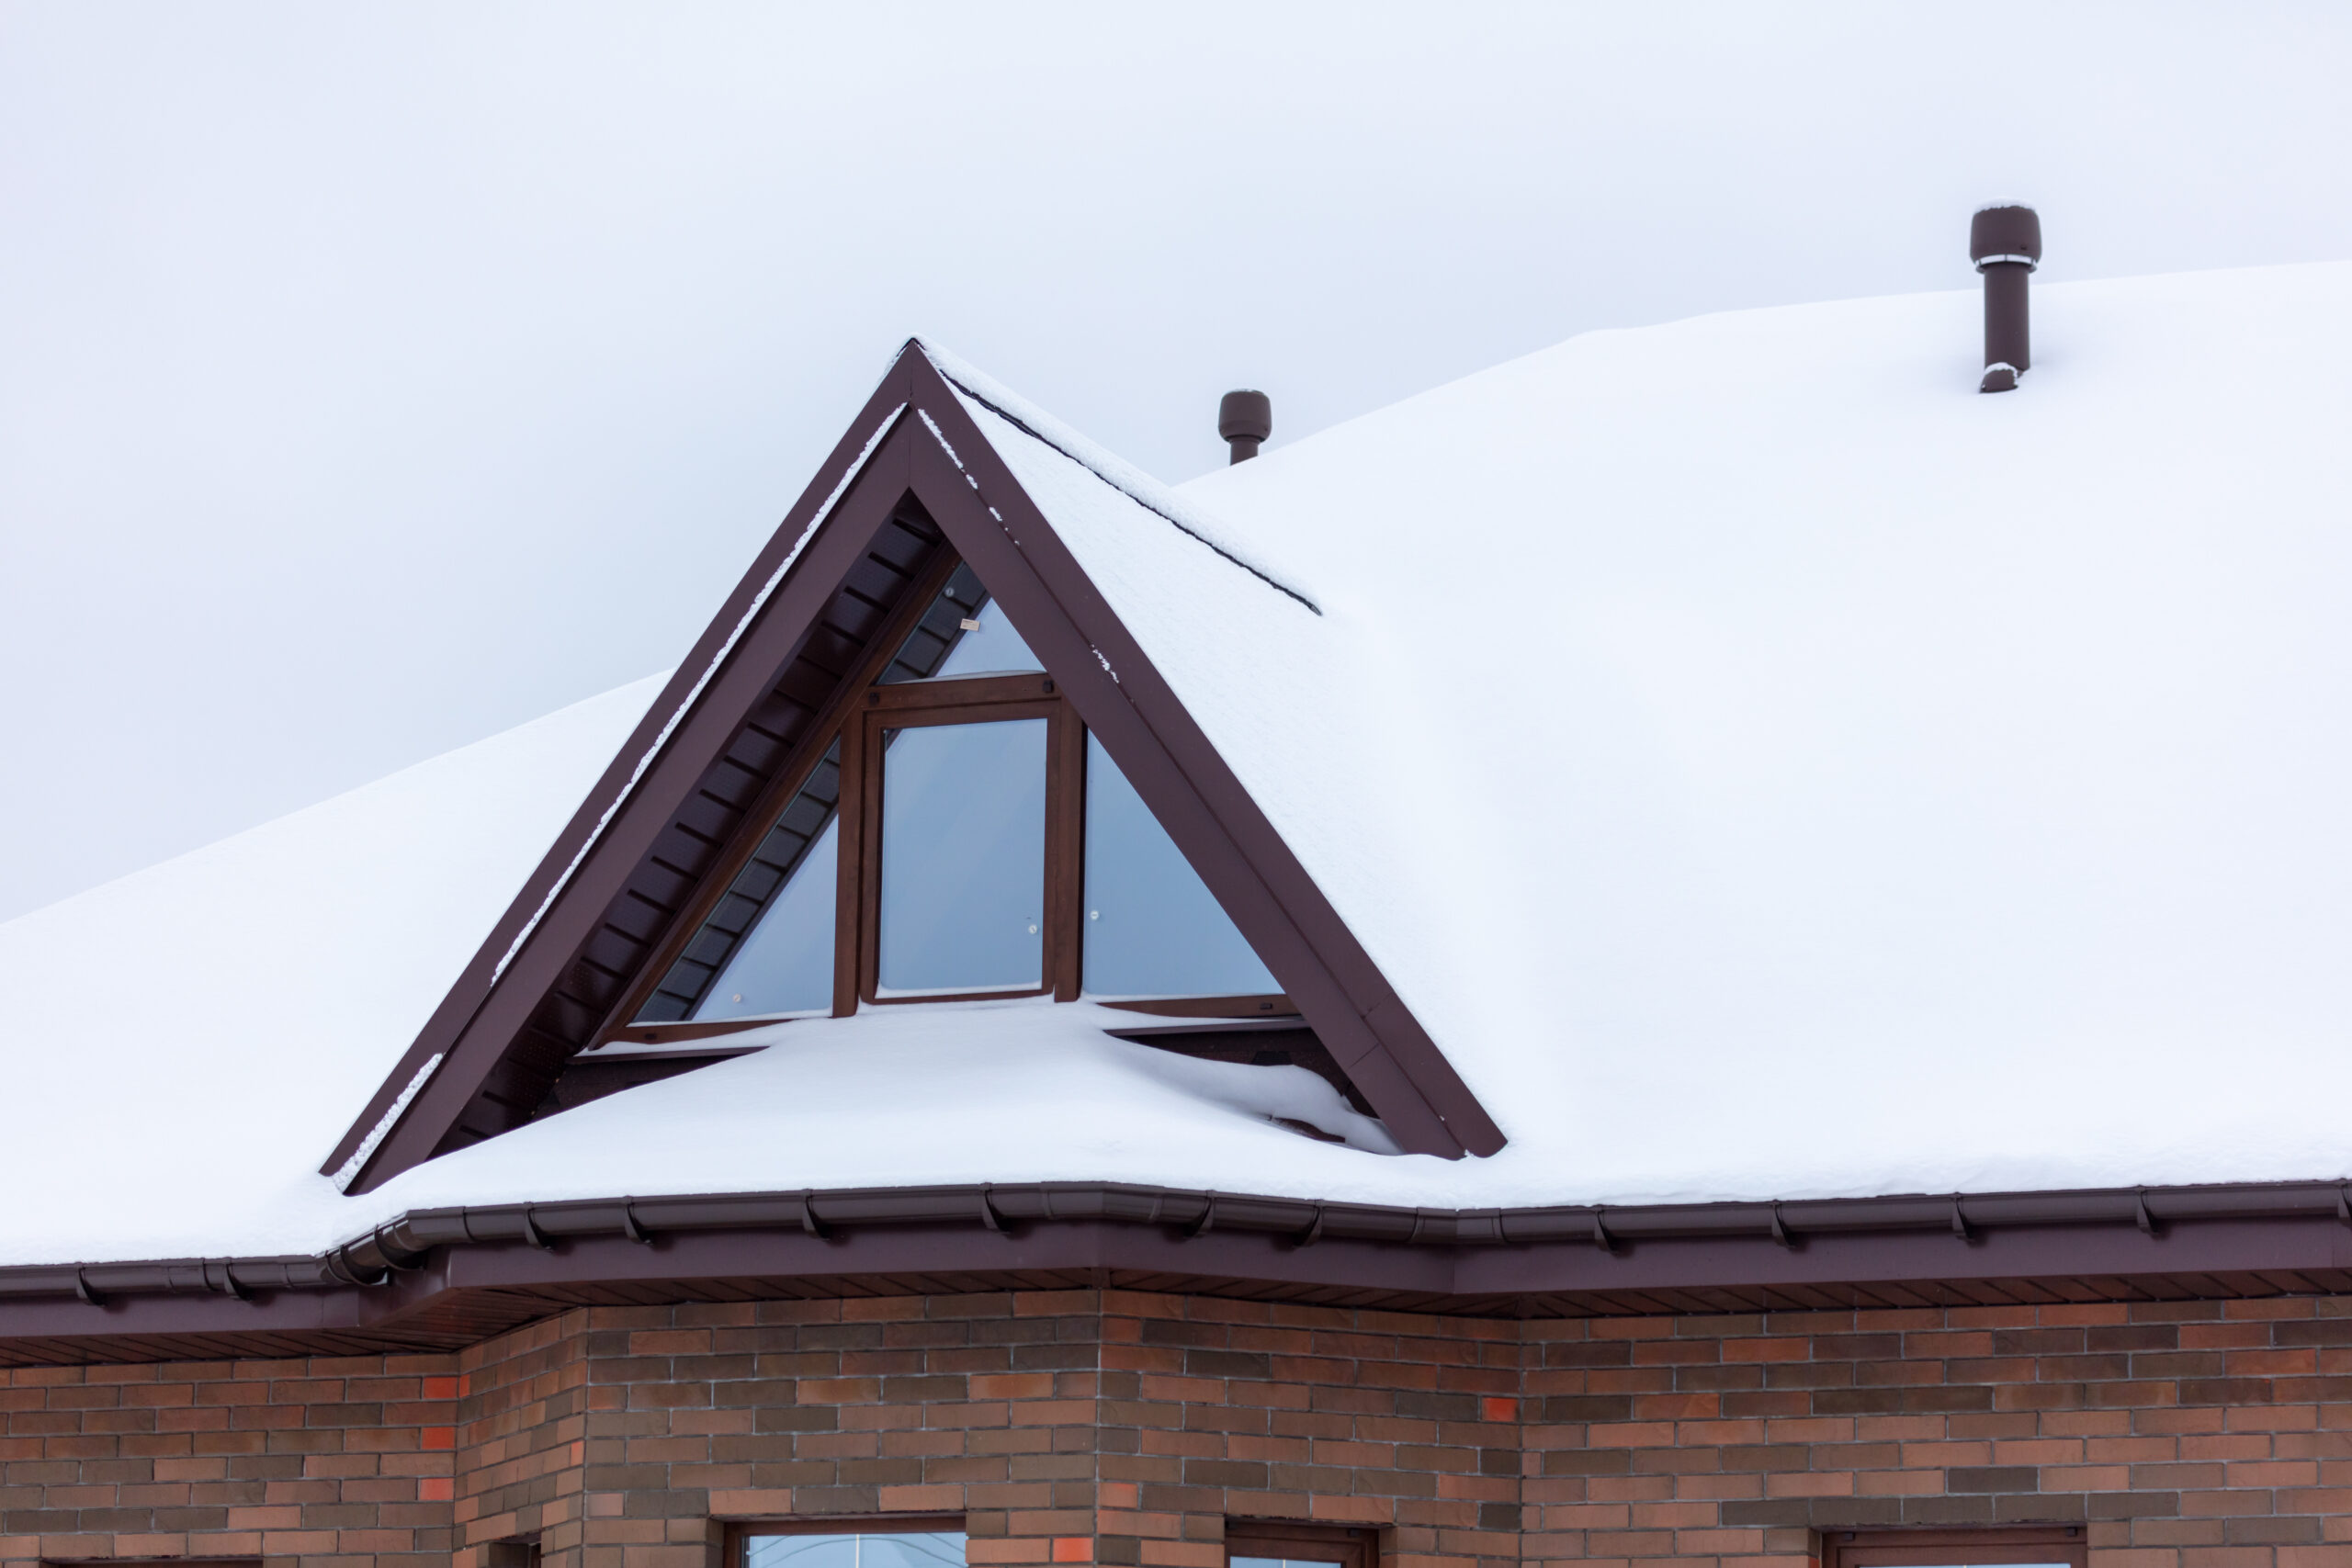 White snow on the roof of the house.